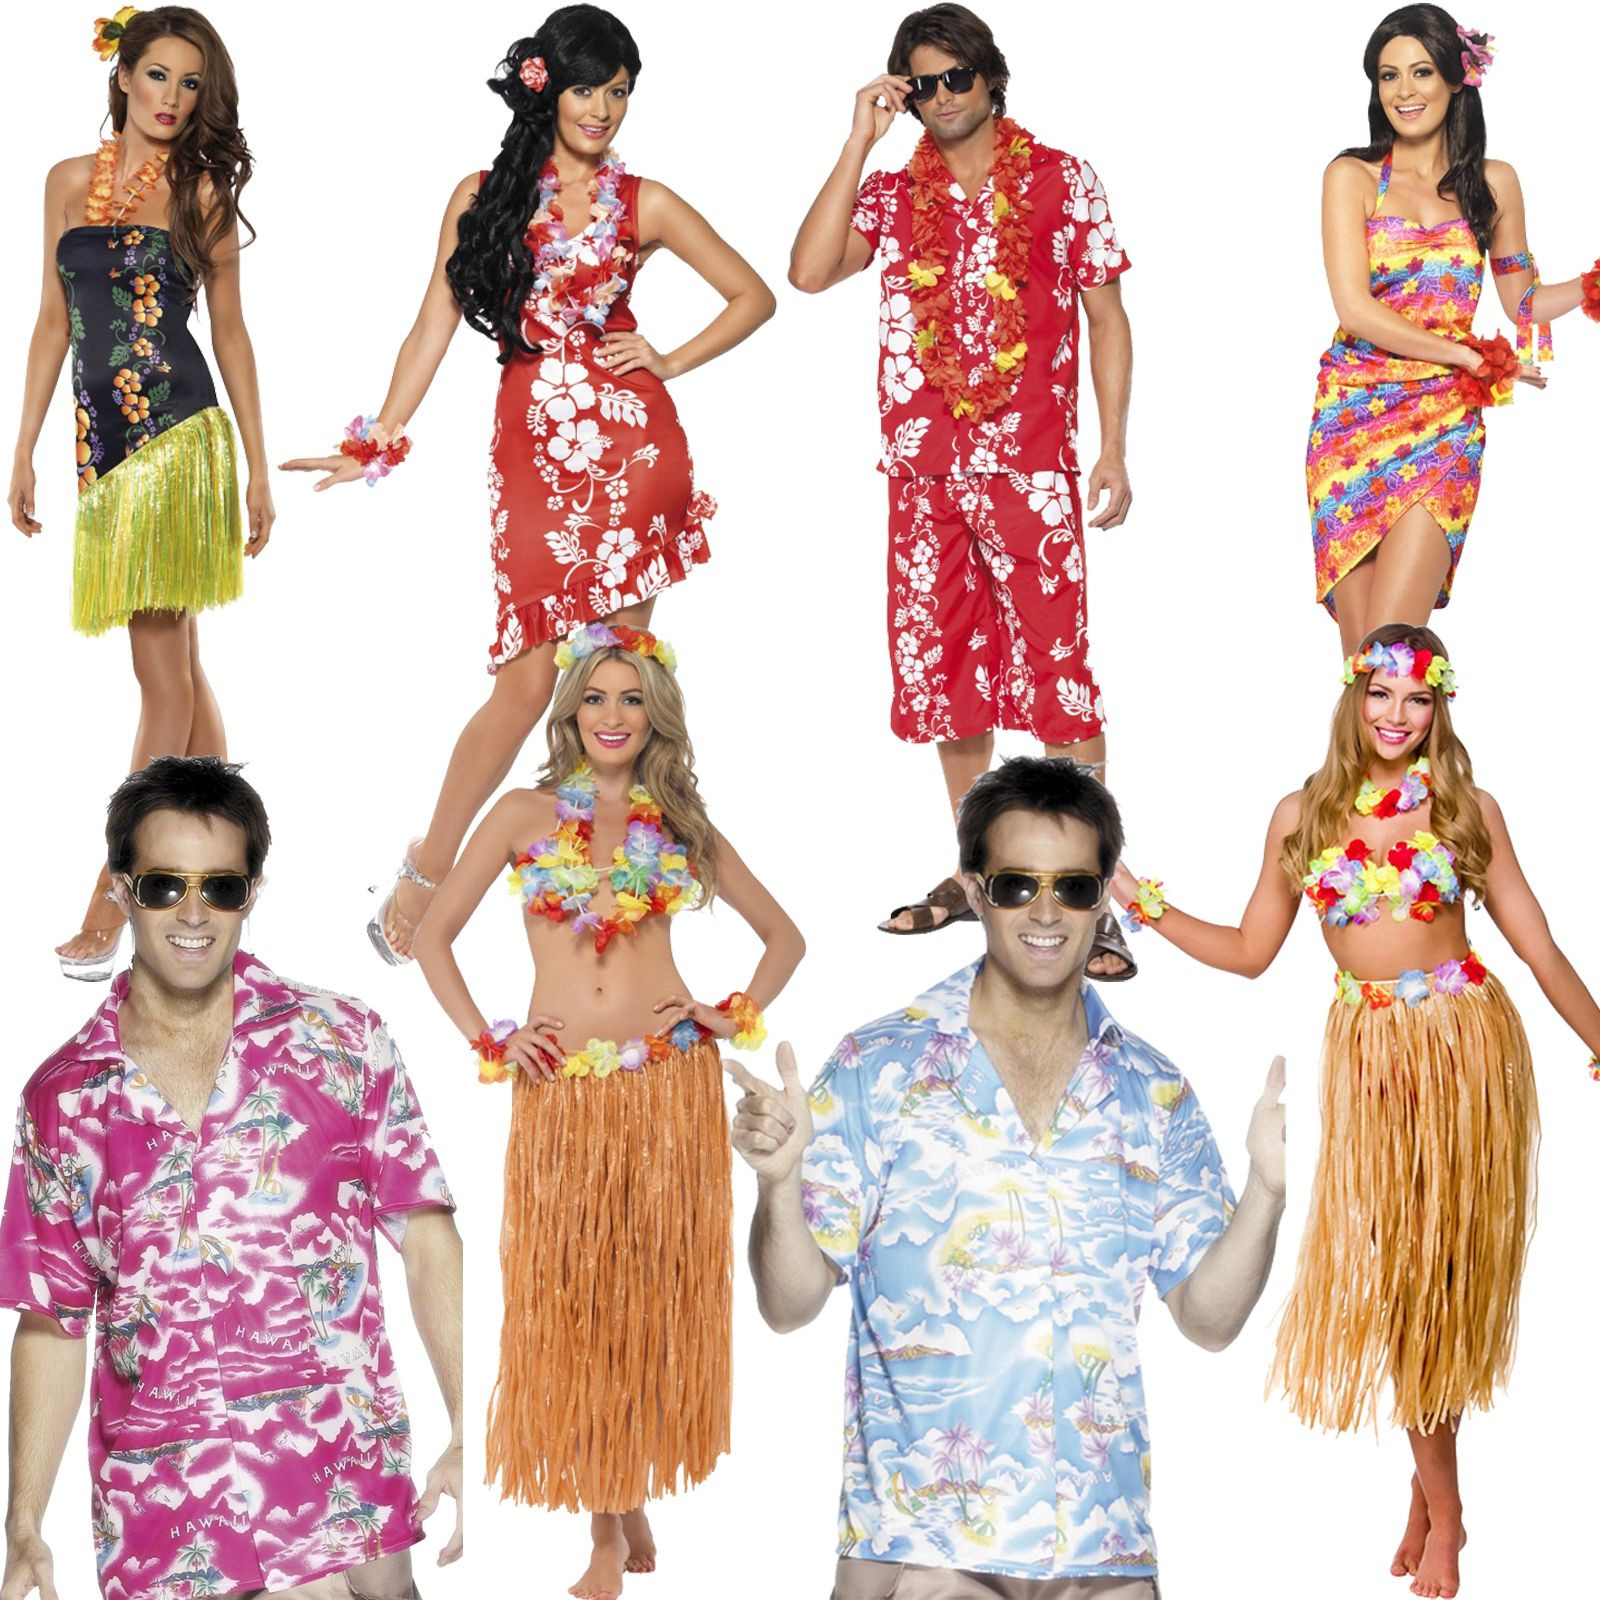 Beach Party Costume Ideas
 beach party costumes ideas Google Search